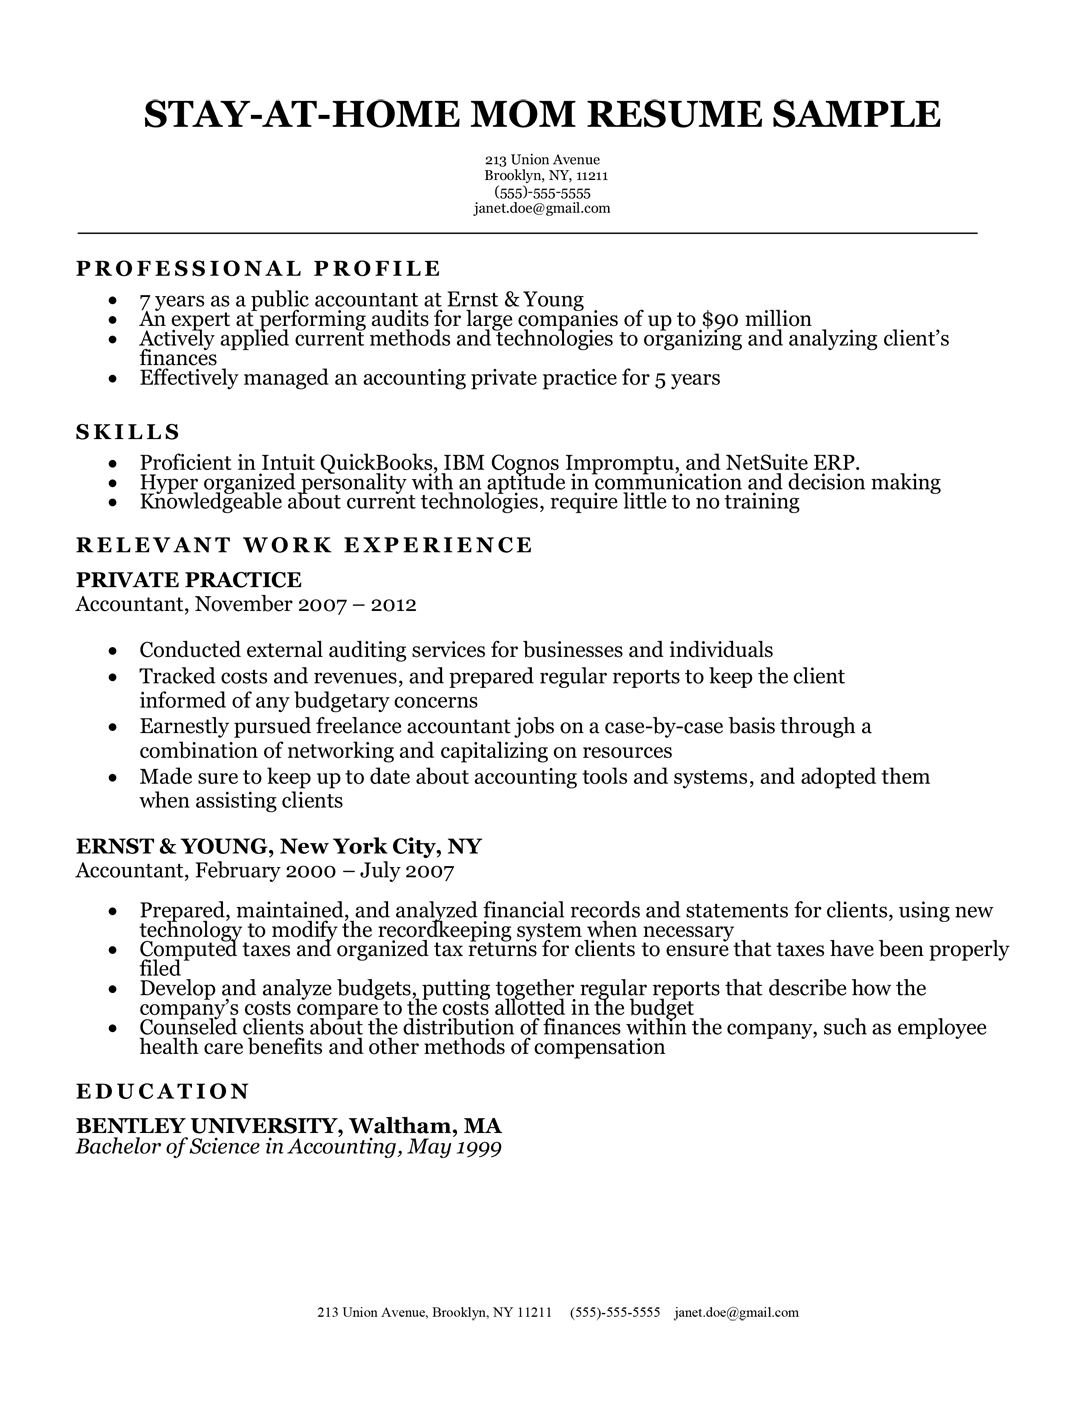 resume for stay at home mom returning to work